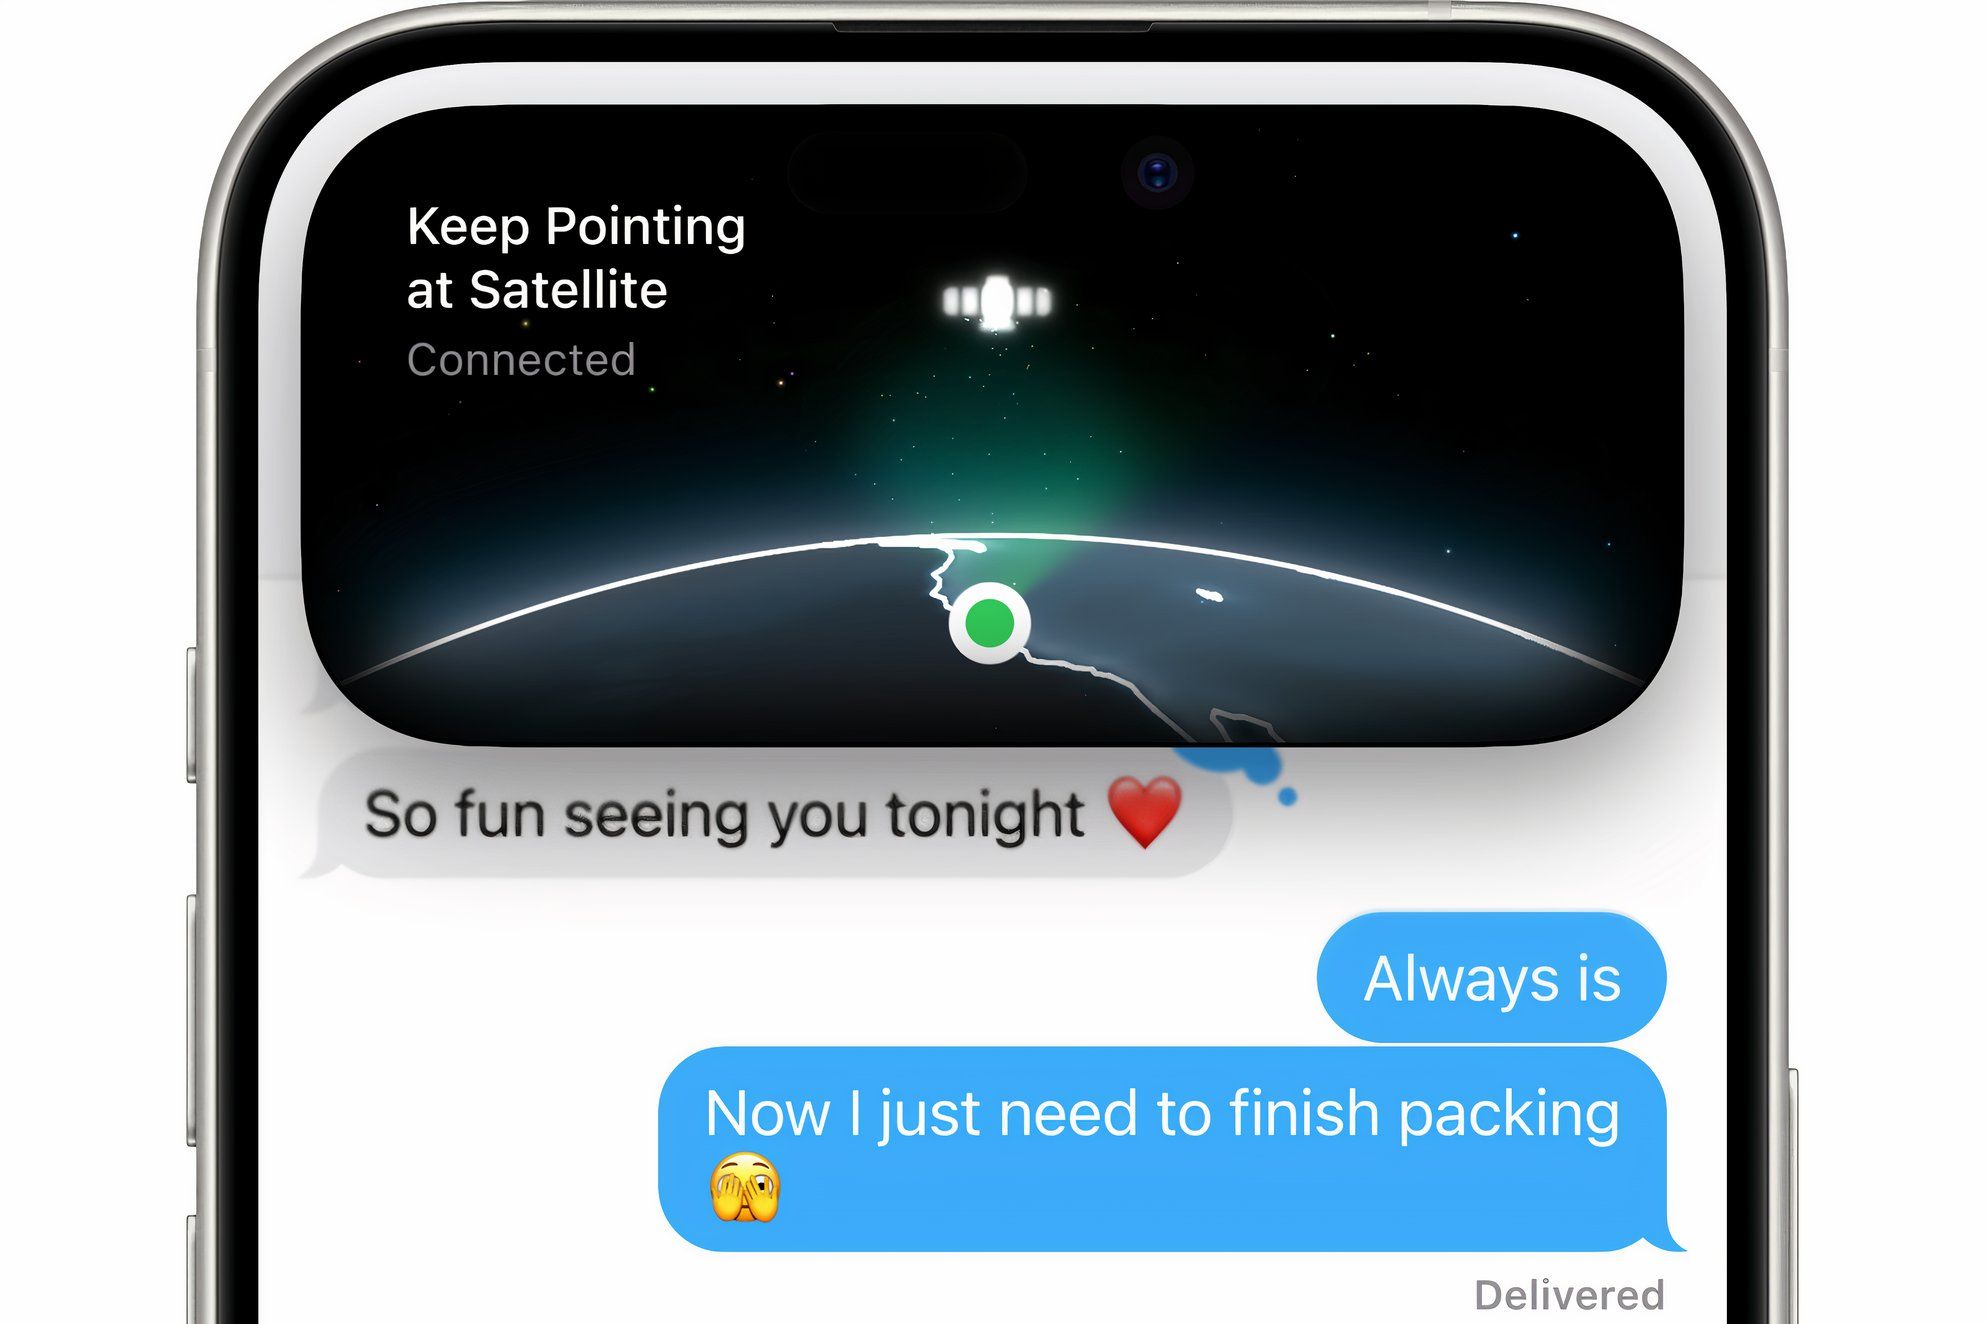 A chat in the iPhone's Messages app, with satellite connectivity guidance displayed at the top.